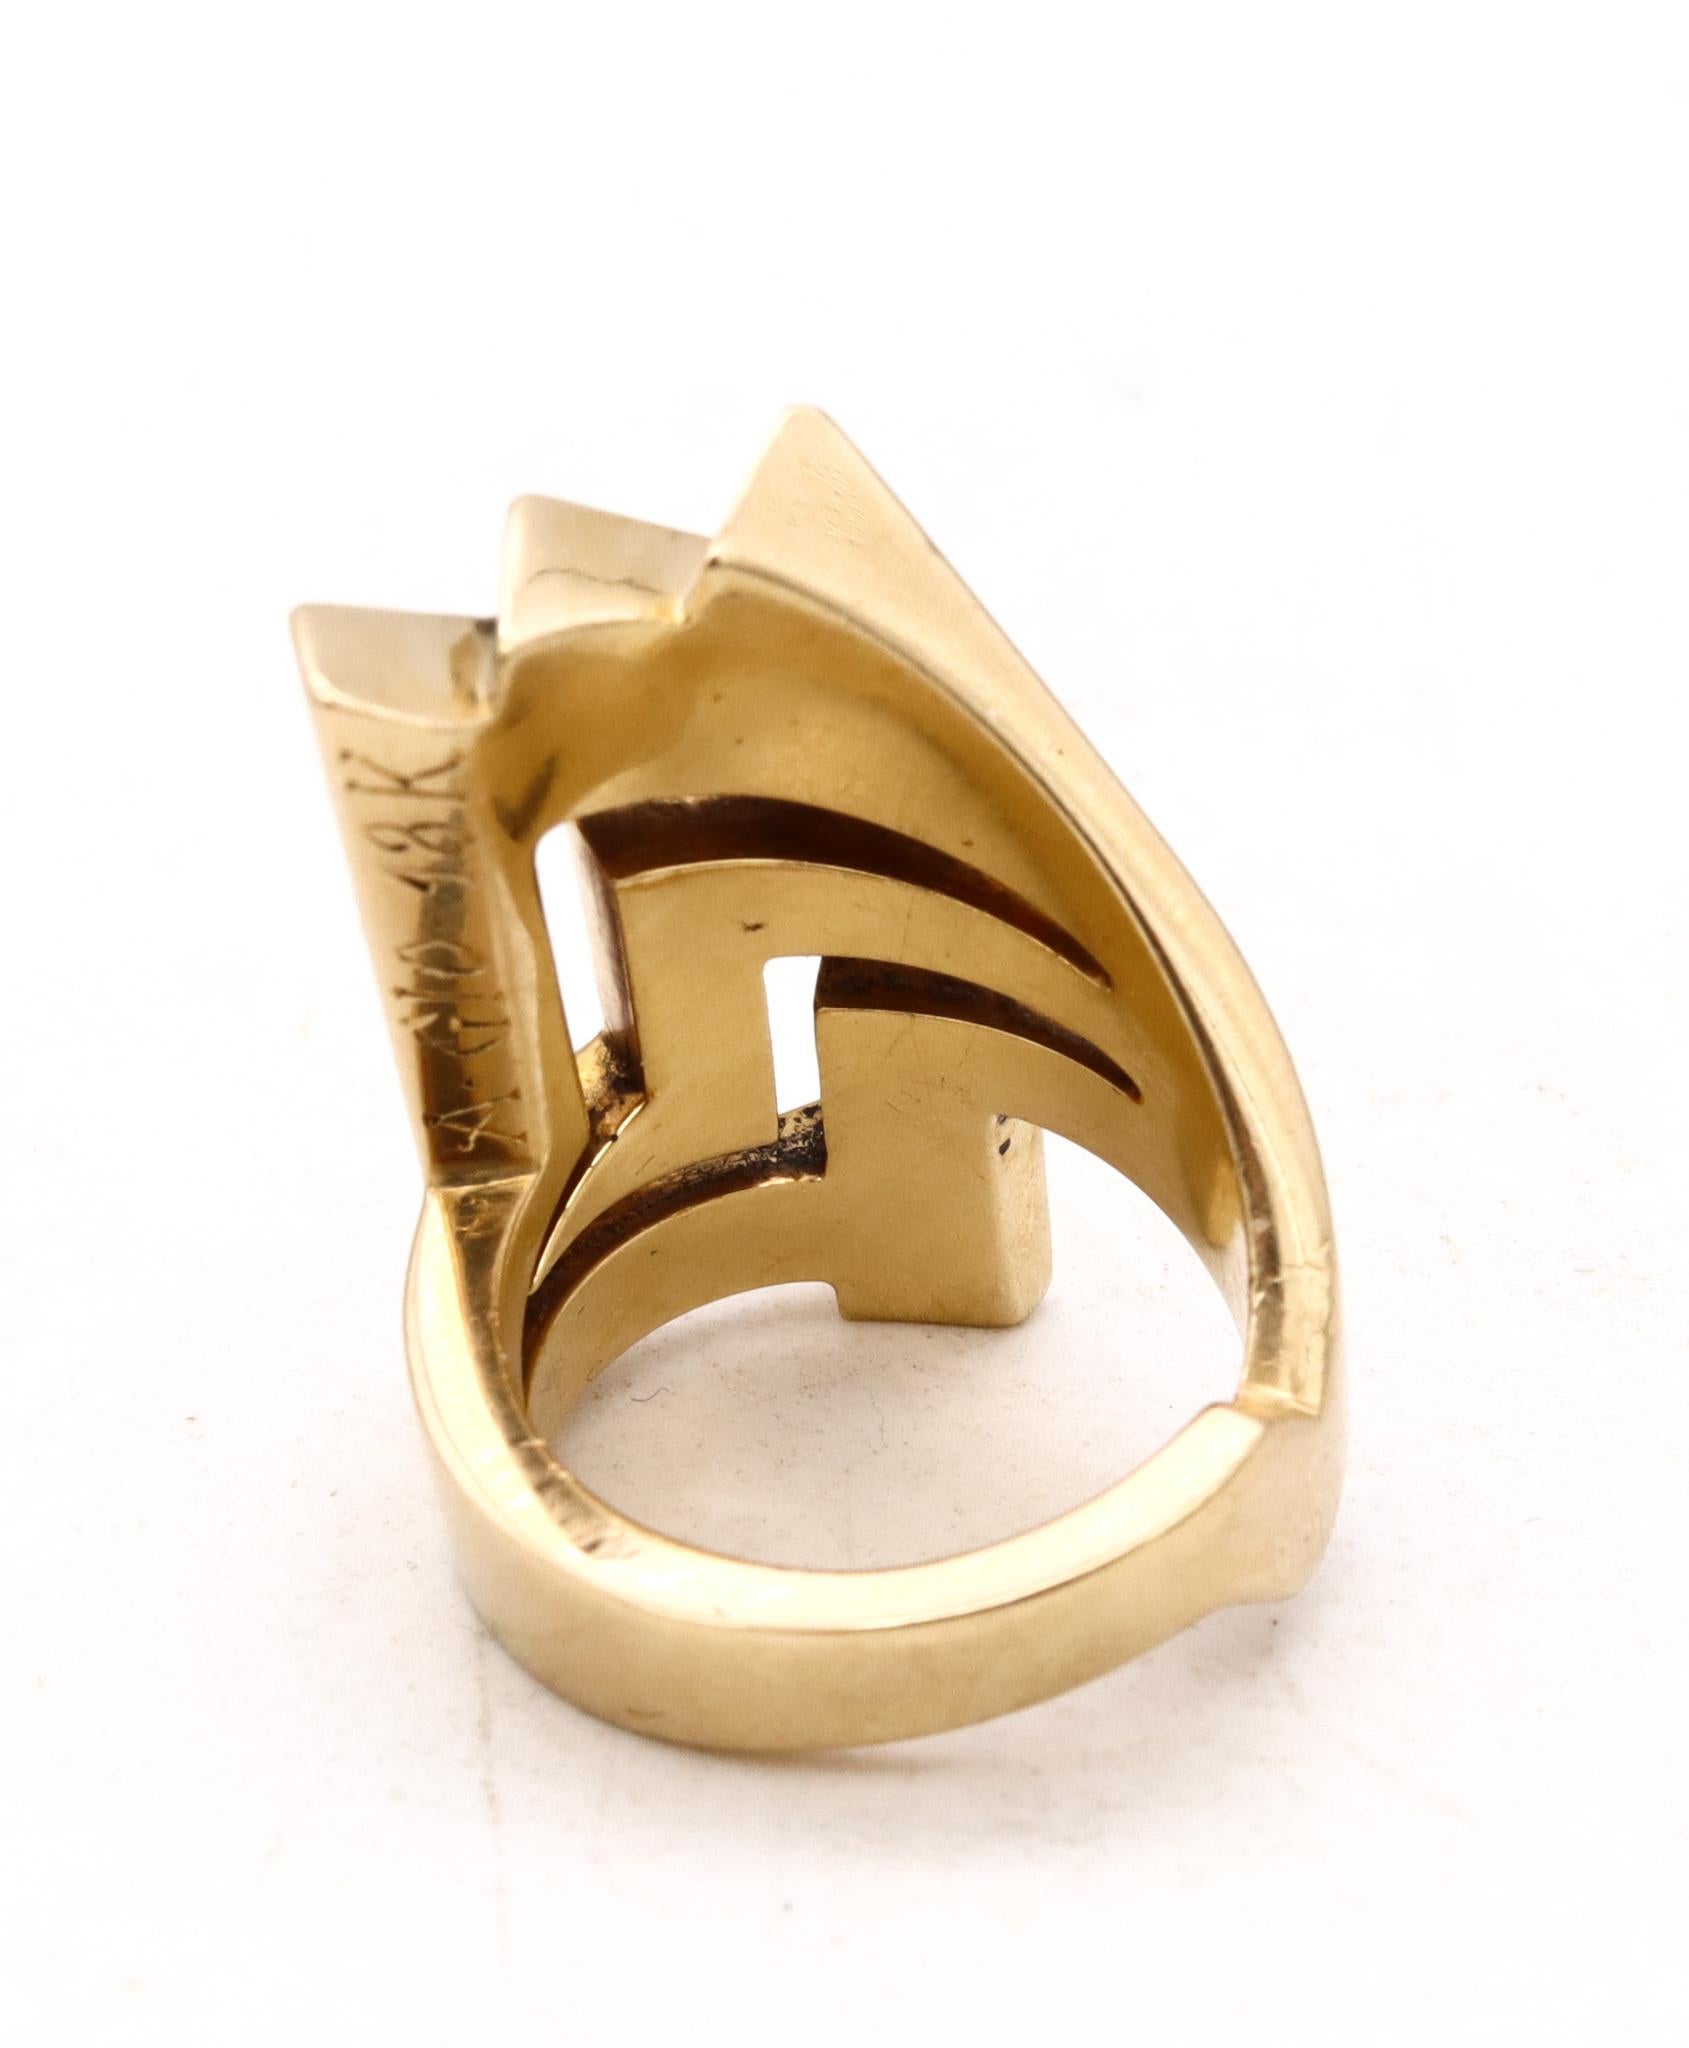 Modernist Alan Giovannetti Studios 1970 California Cocktail Ring Solid 18kt Yellow Gold